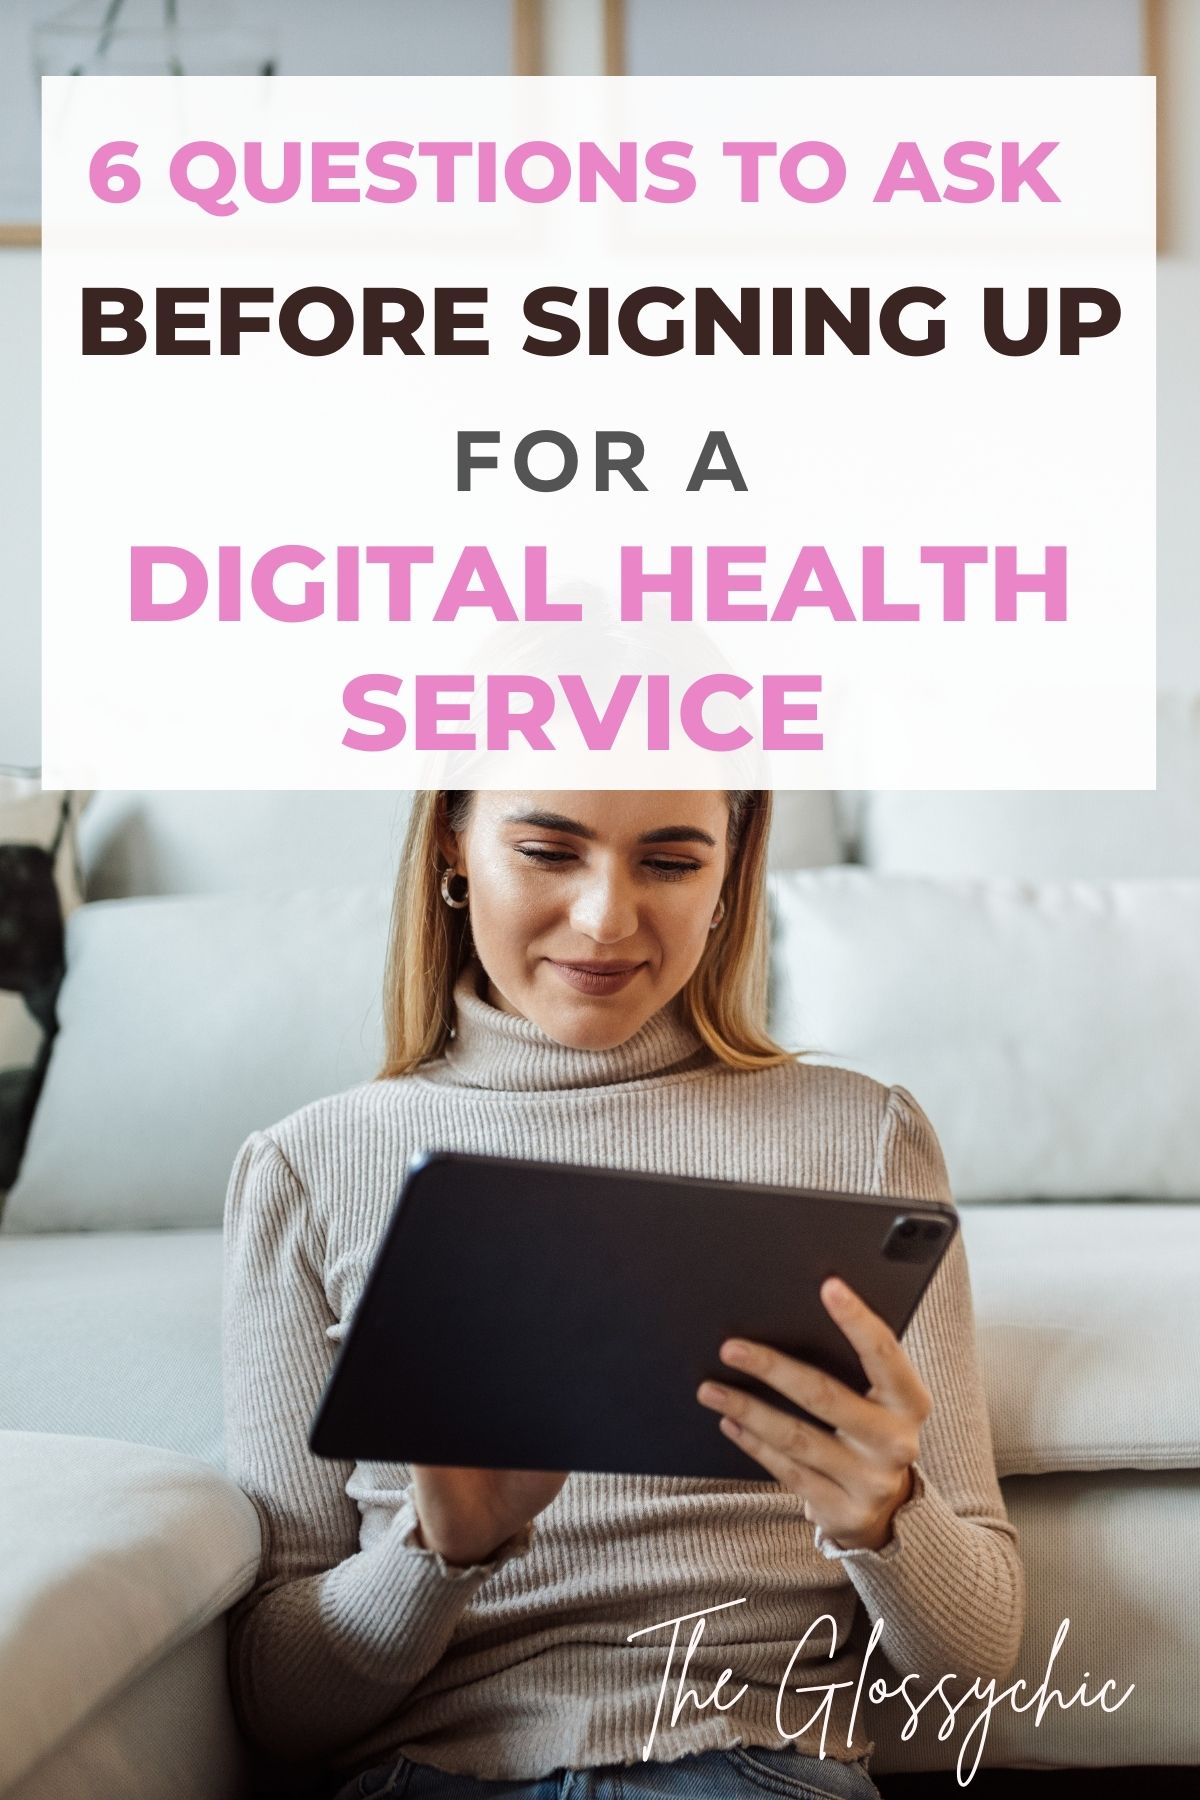 6 Questions To Ask Before Signing Up For A Digital Health Service